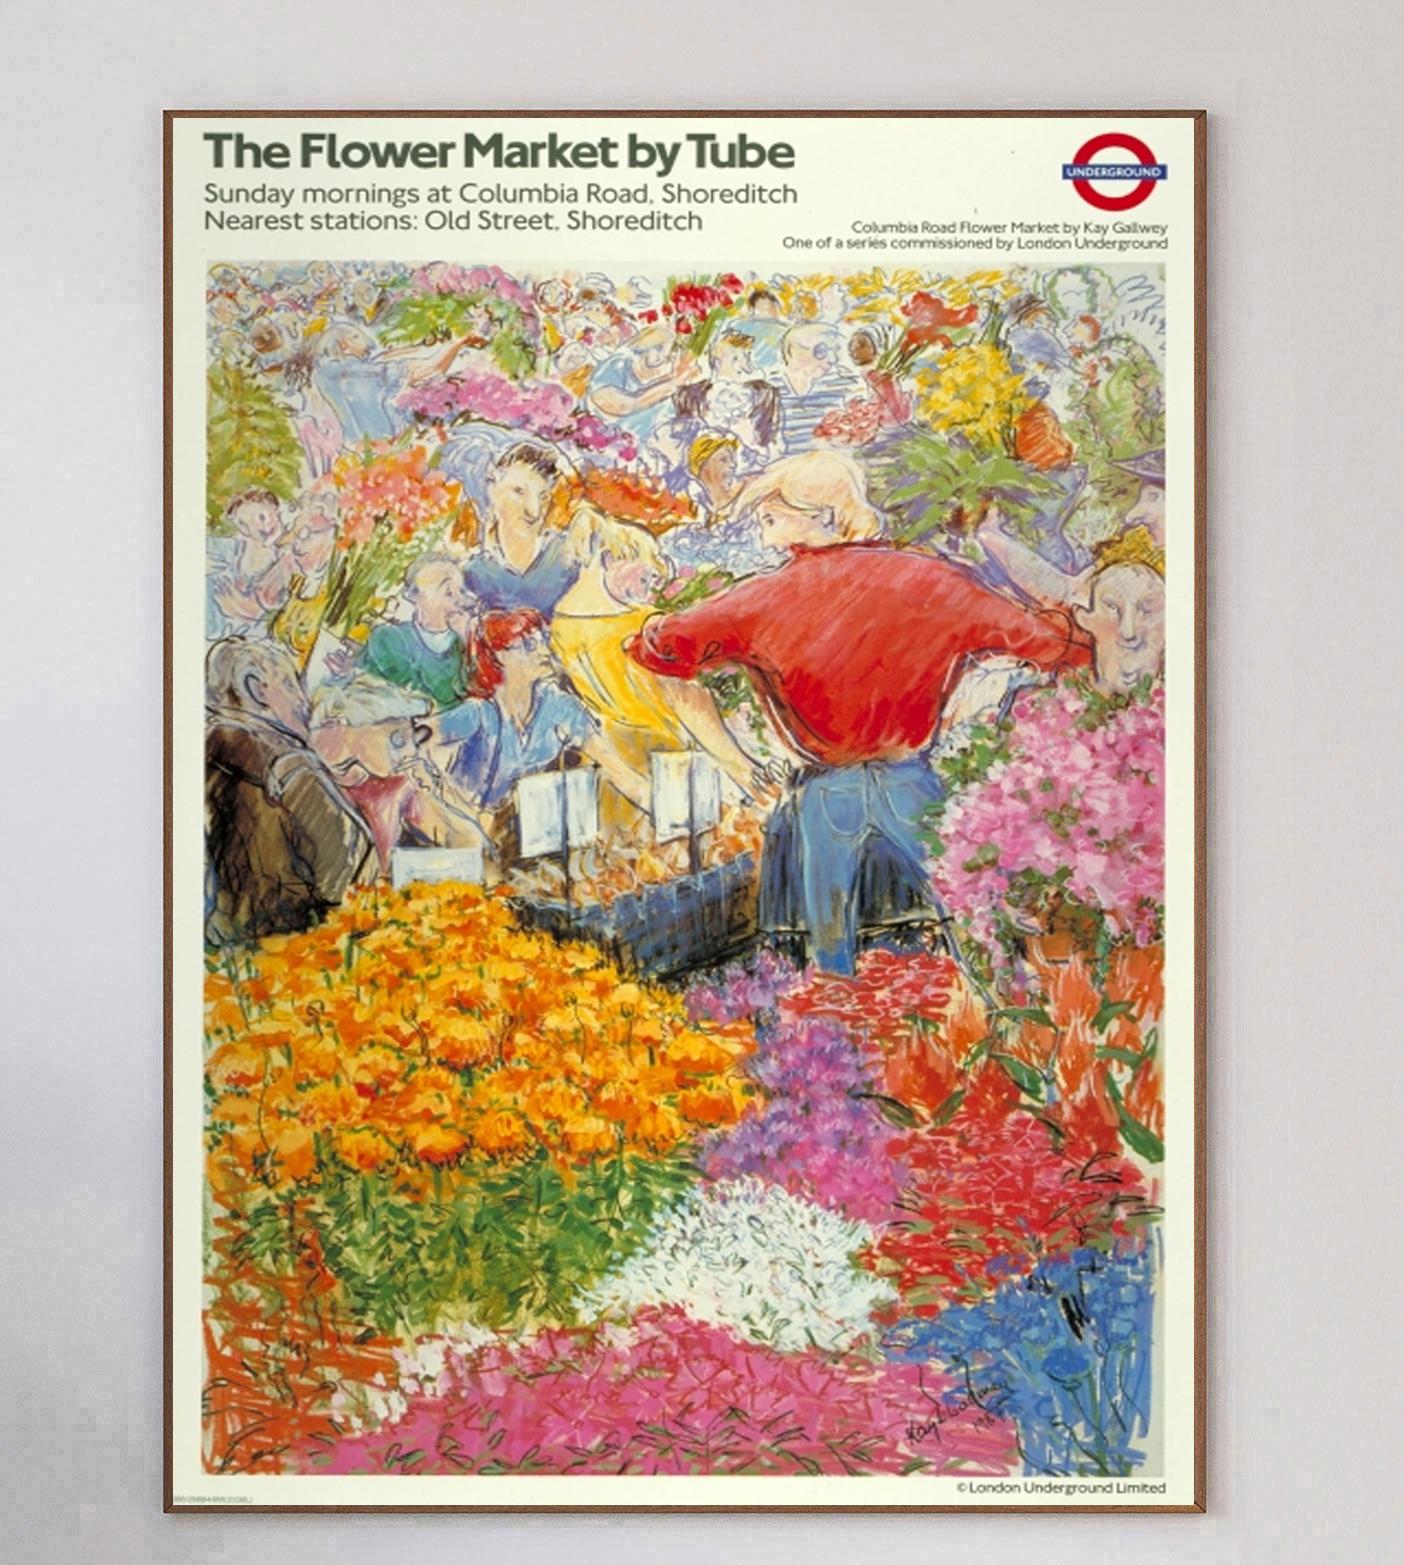 British artist Kay Gallwey designed the artwork for this brilliant poster for 